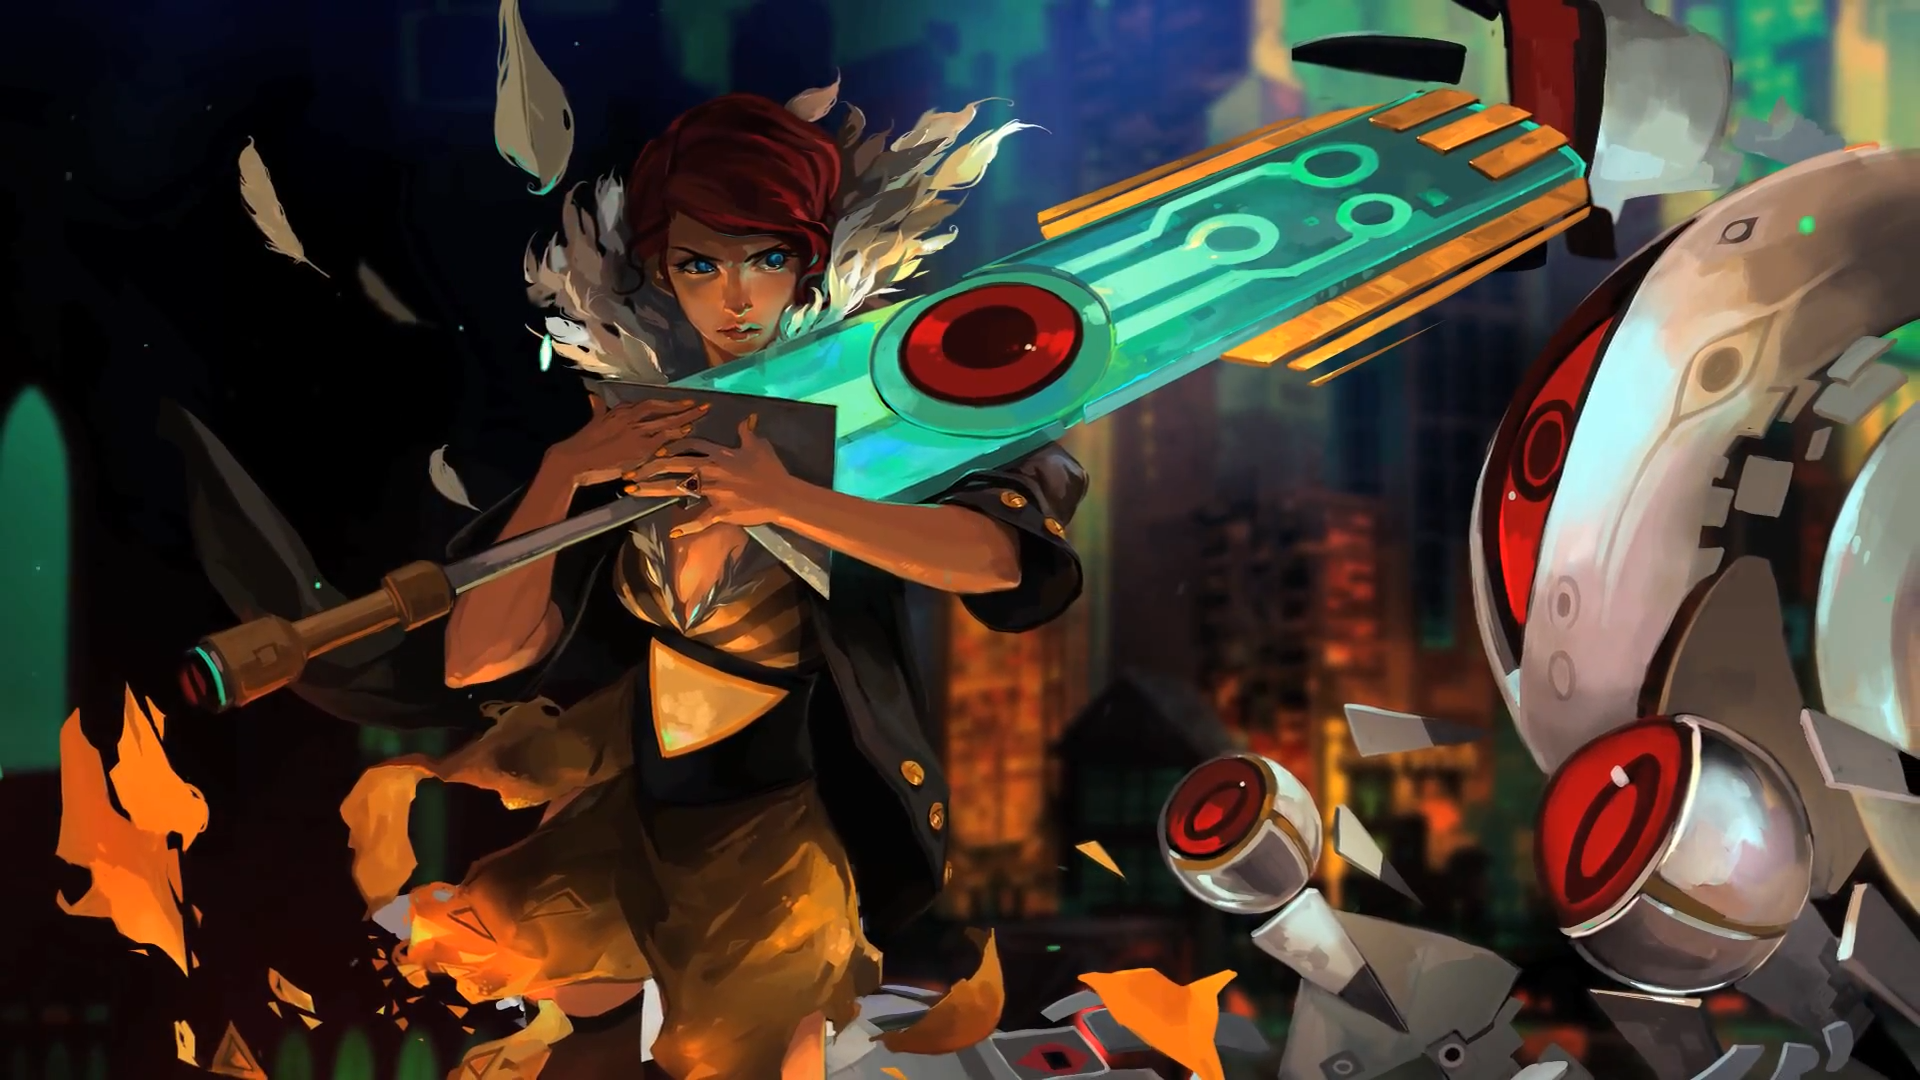 Load 23 More Imagesgrid View - Transistor Game , HD Wallpaper & Backgrounds